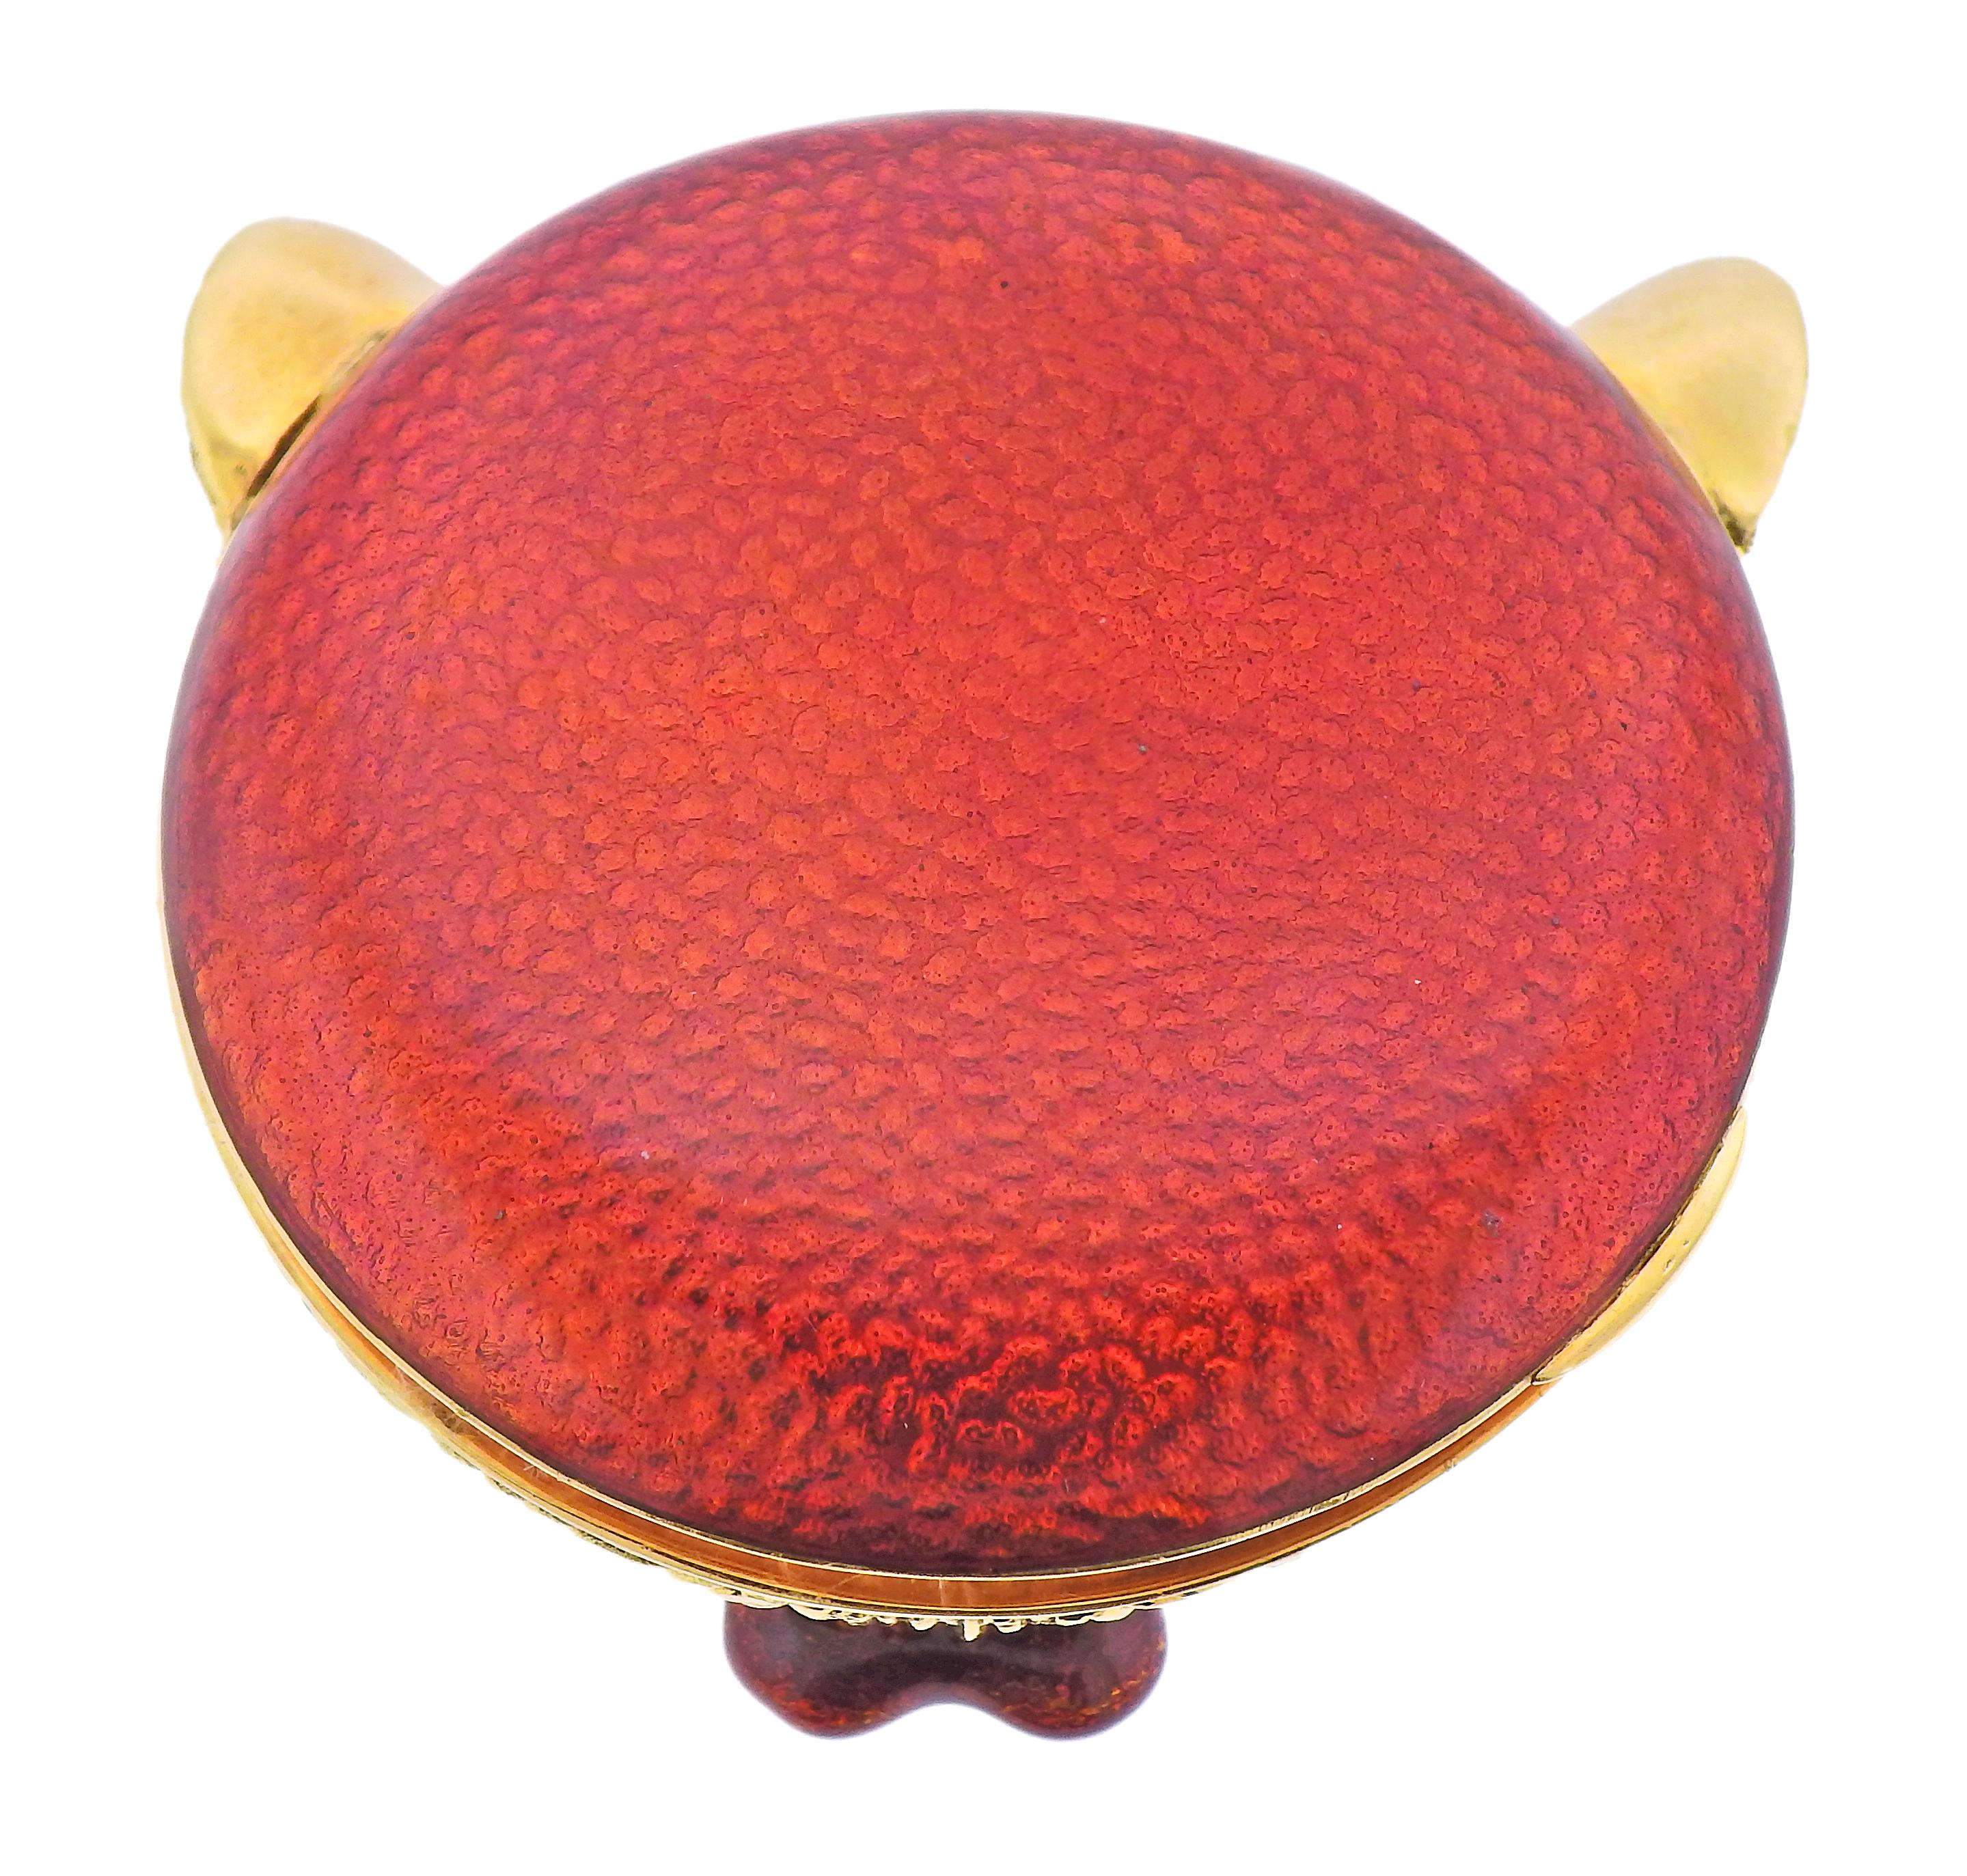 18k gold panther compact mirror case, decorated with enamel, chrysoprase eyes and approx. 0.30ctw in diamonds. Case is 56mm x 62mm. Marked: 750, 1, 022. Weight - 133.2 grams. 